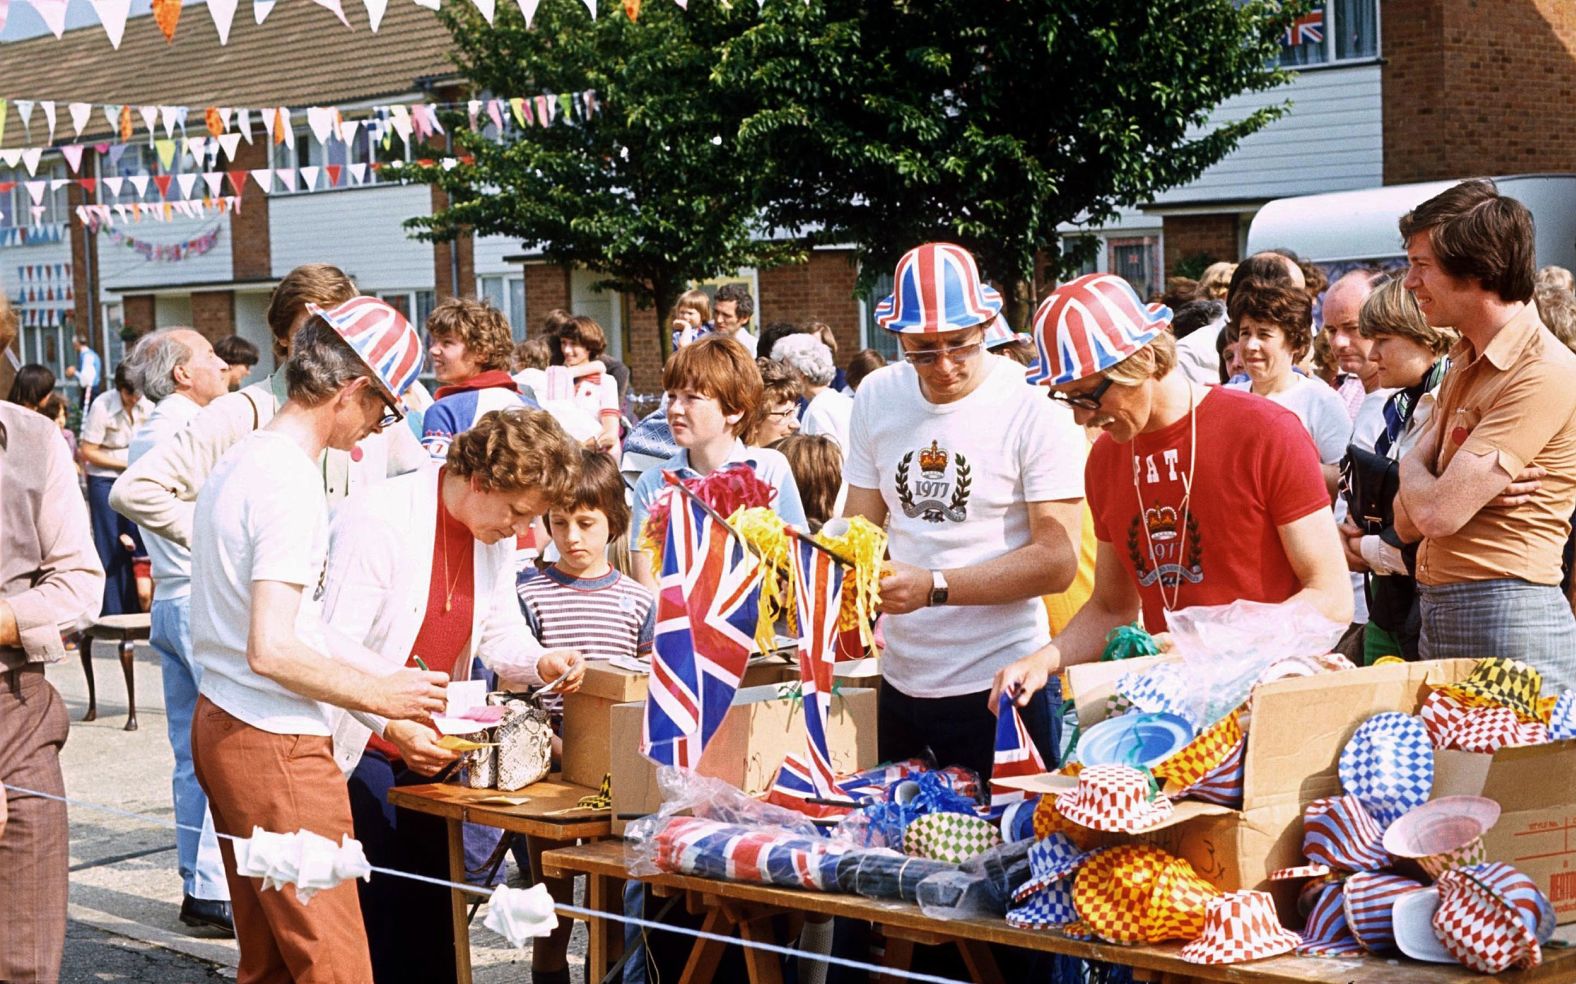 Parties are held in streets and villages up and down the country to commemorate the Silver Jubilee. There are 4,000 such events in London alone, according to the official royal <a href="index.php?page=&url=https%3A%2F%2Fwww.royal.uk%2Fqueens-jubilees-and-other-milestones" target="_blank" target="_blank">website</a>.